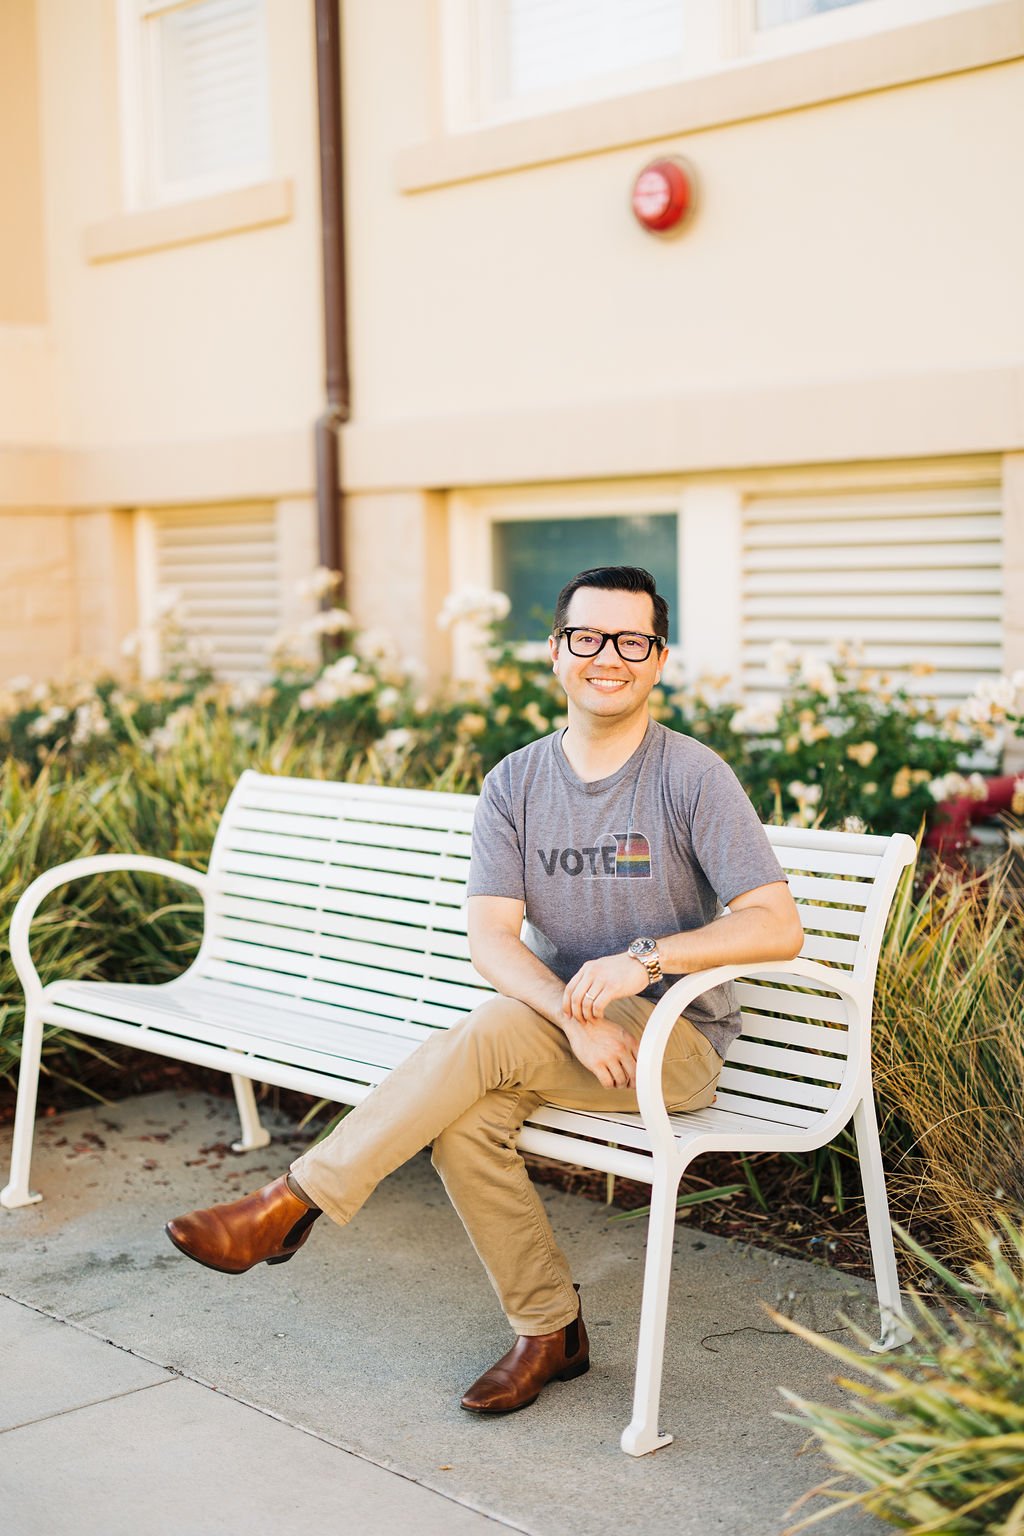   Shaver-Burgess began working as a wedding planner after serving on the board of former nonprofit organization National Gay Wedding Association. His efforts in creating a friendly space for LGBTQ+ couples led to him winning OC Queer Activist/Philant